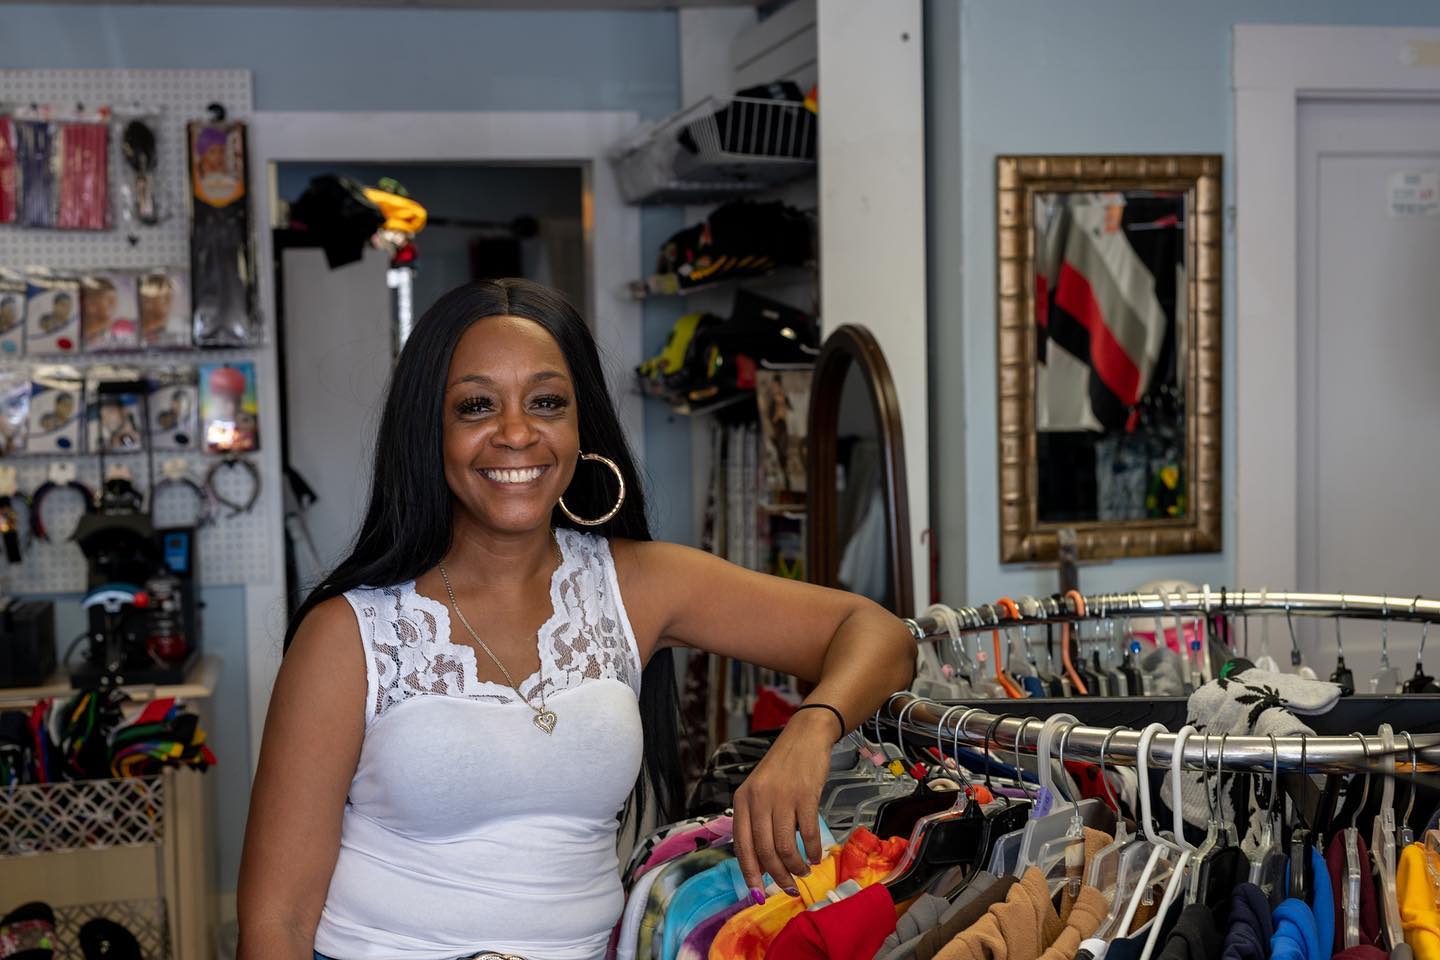 the owner of Stylz 4 Less inside her shop